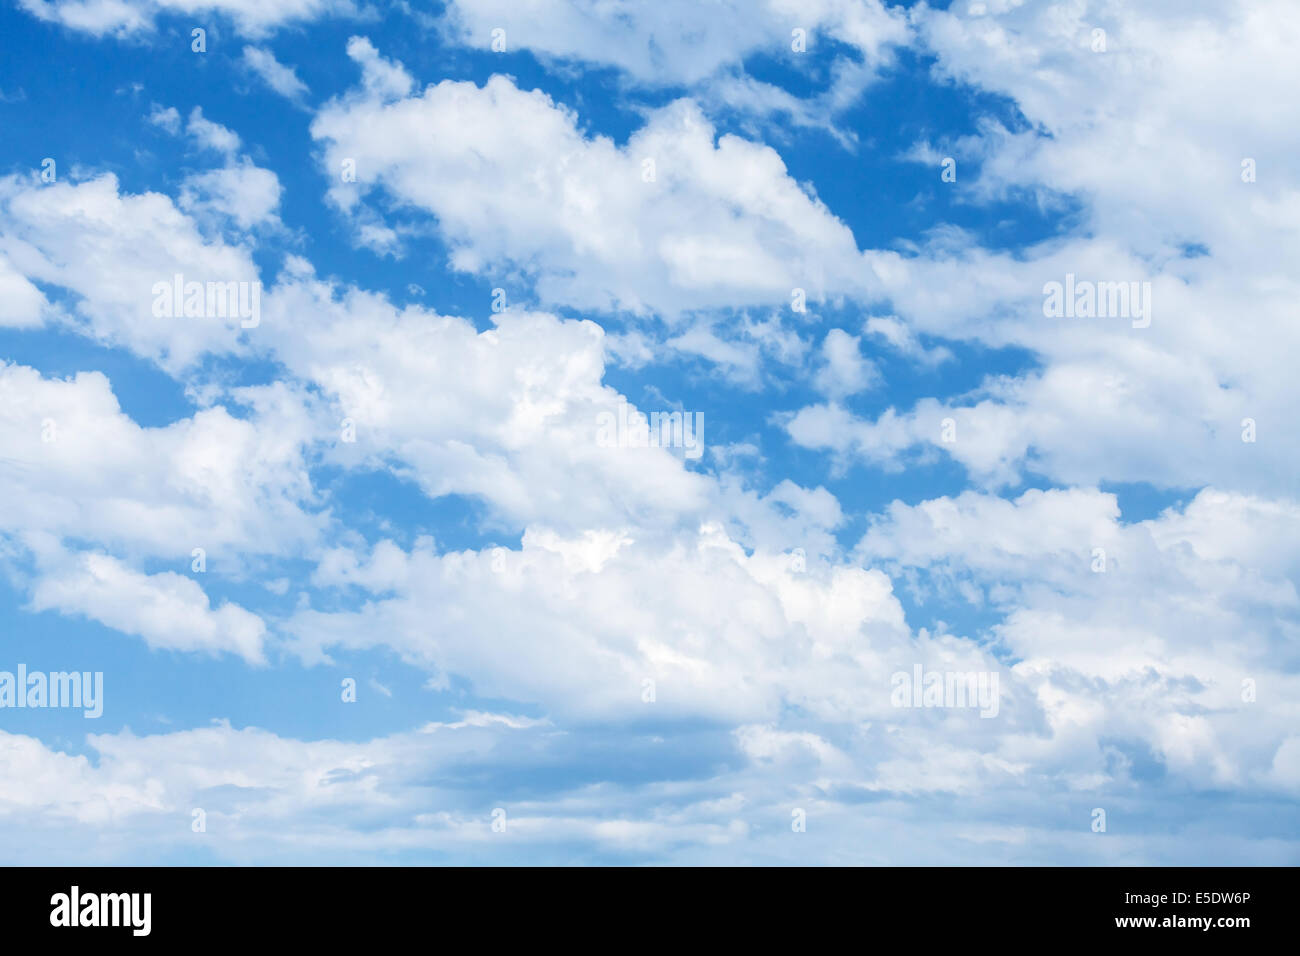 Bright blue cloudy sky background photo texture Stock Photo